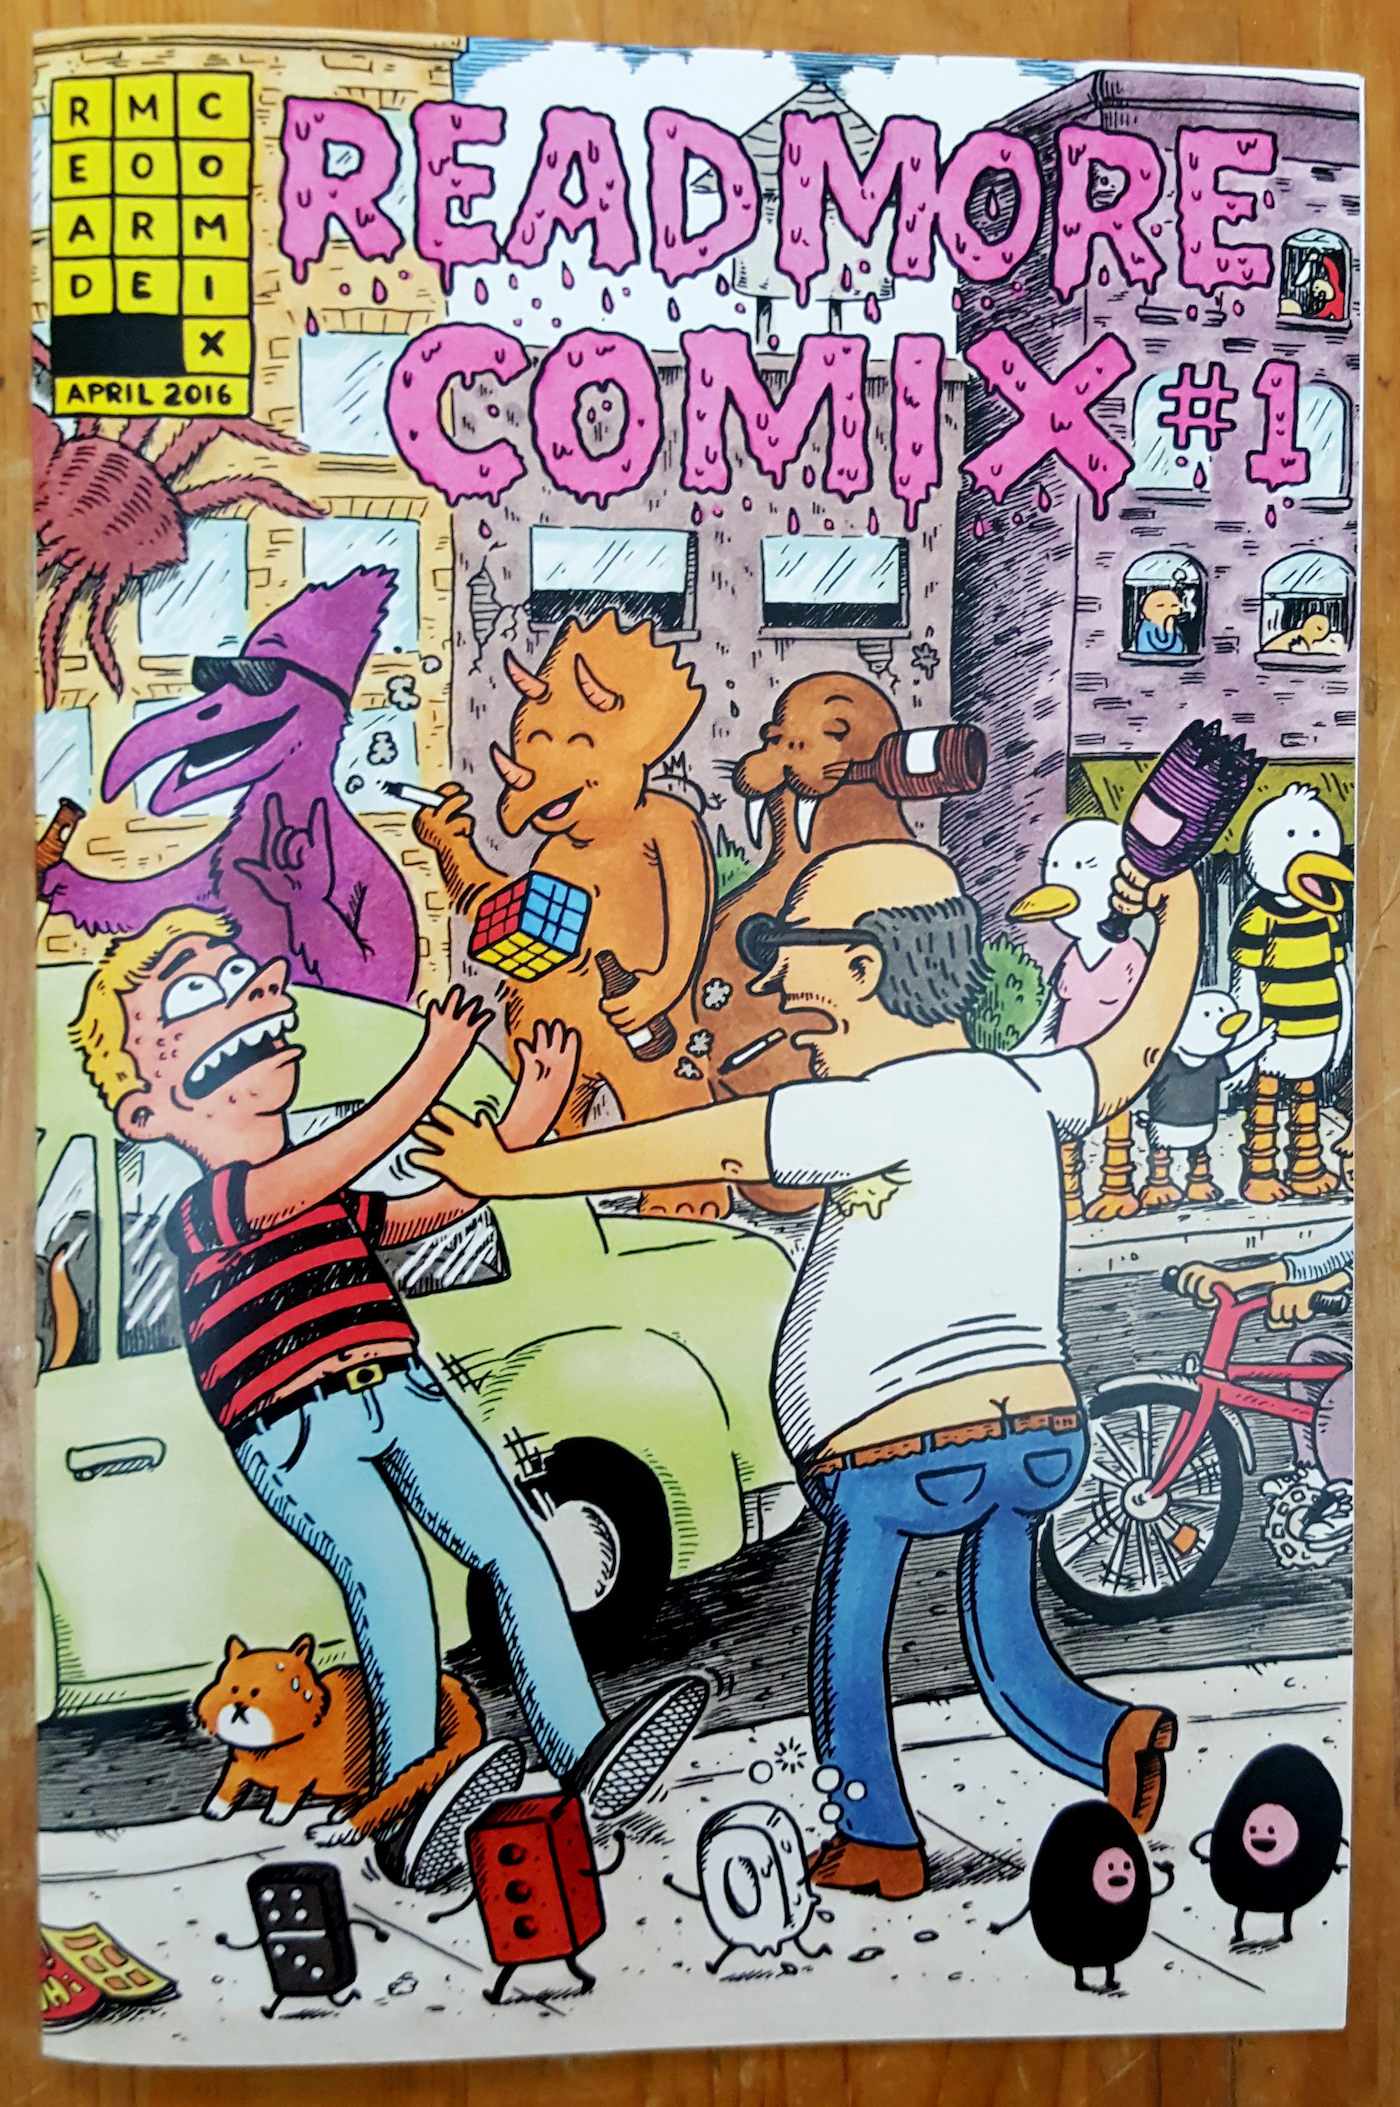 Read More Comix #1 by Robb Mirsky, James Spencer, and David Craig